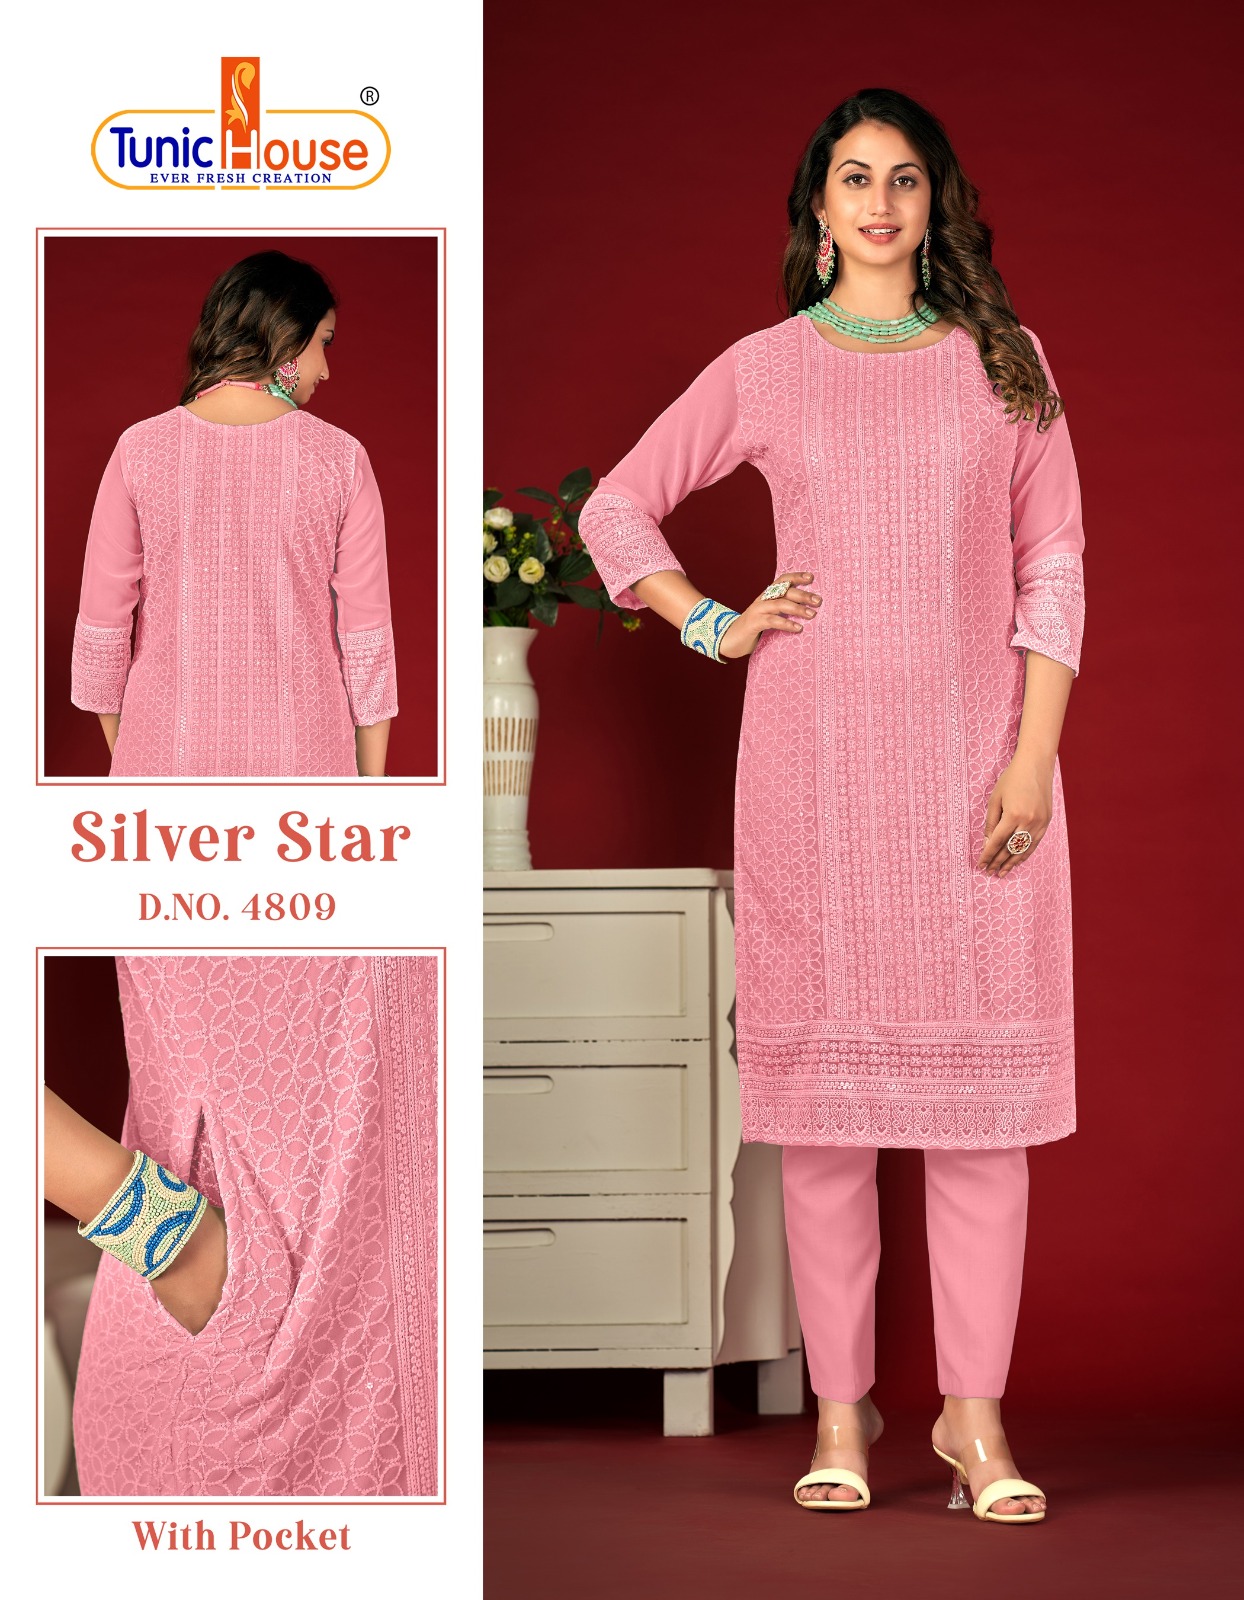 Tunic Houes Silver Star collection 6